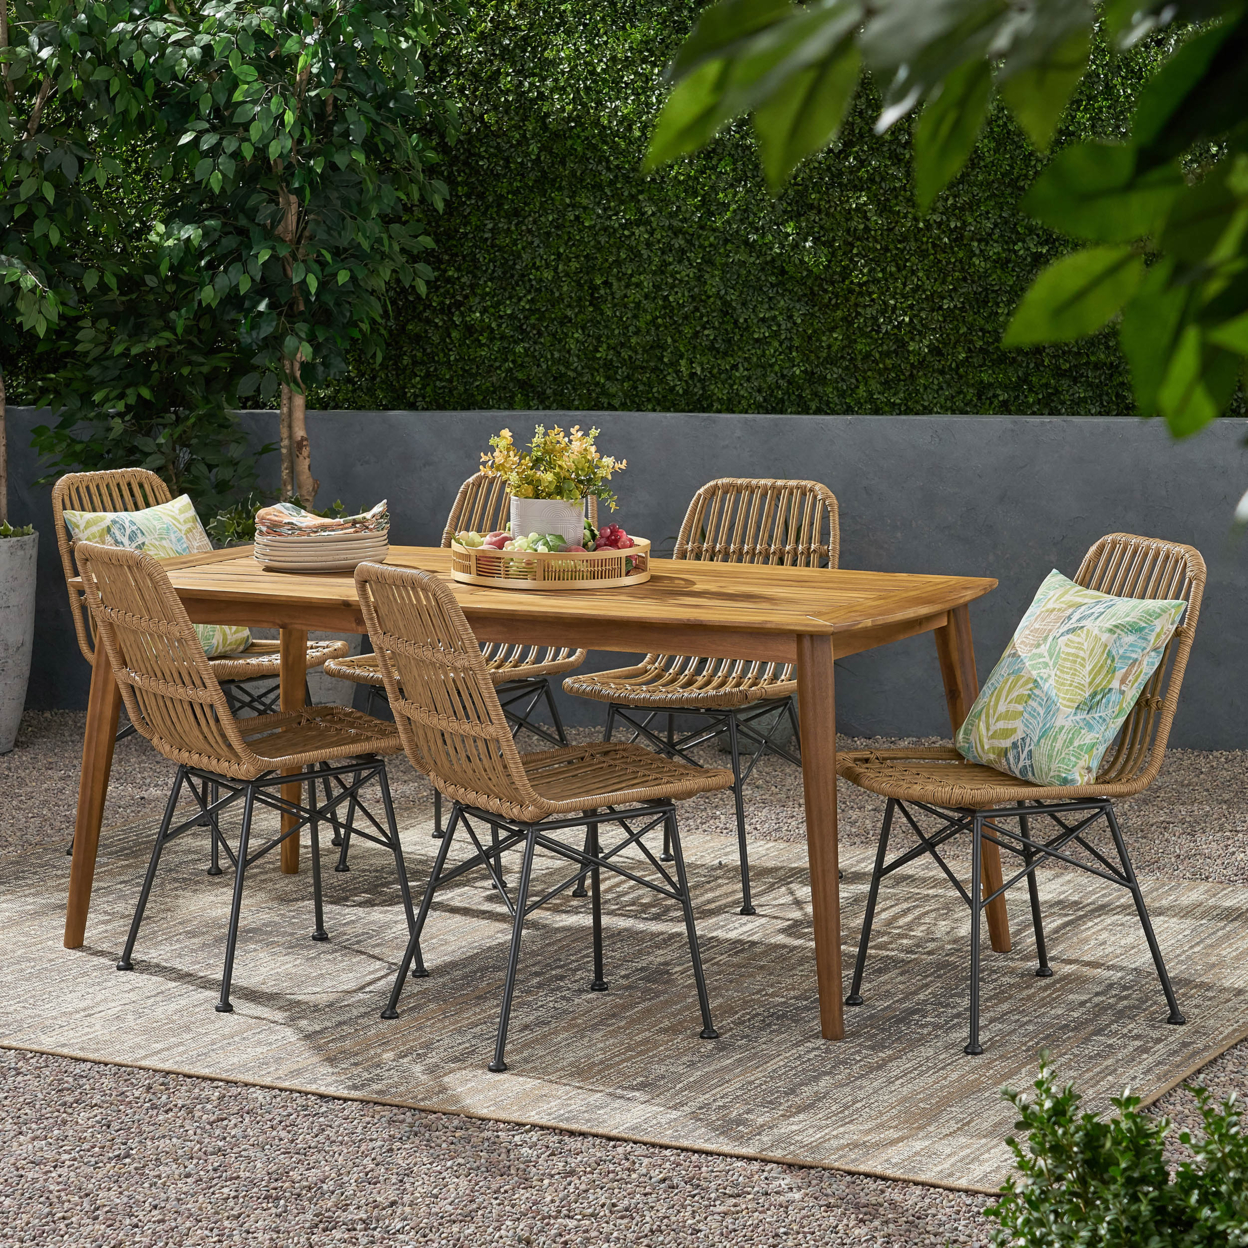 Kendal Outdoor 6 Seater Wicker Dining Set - Gray